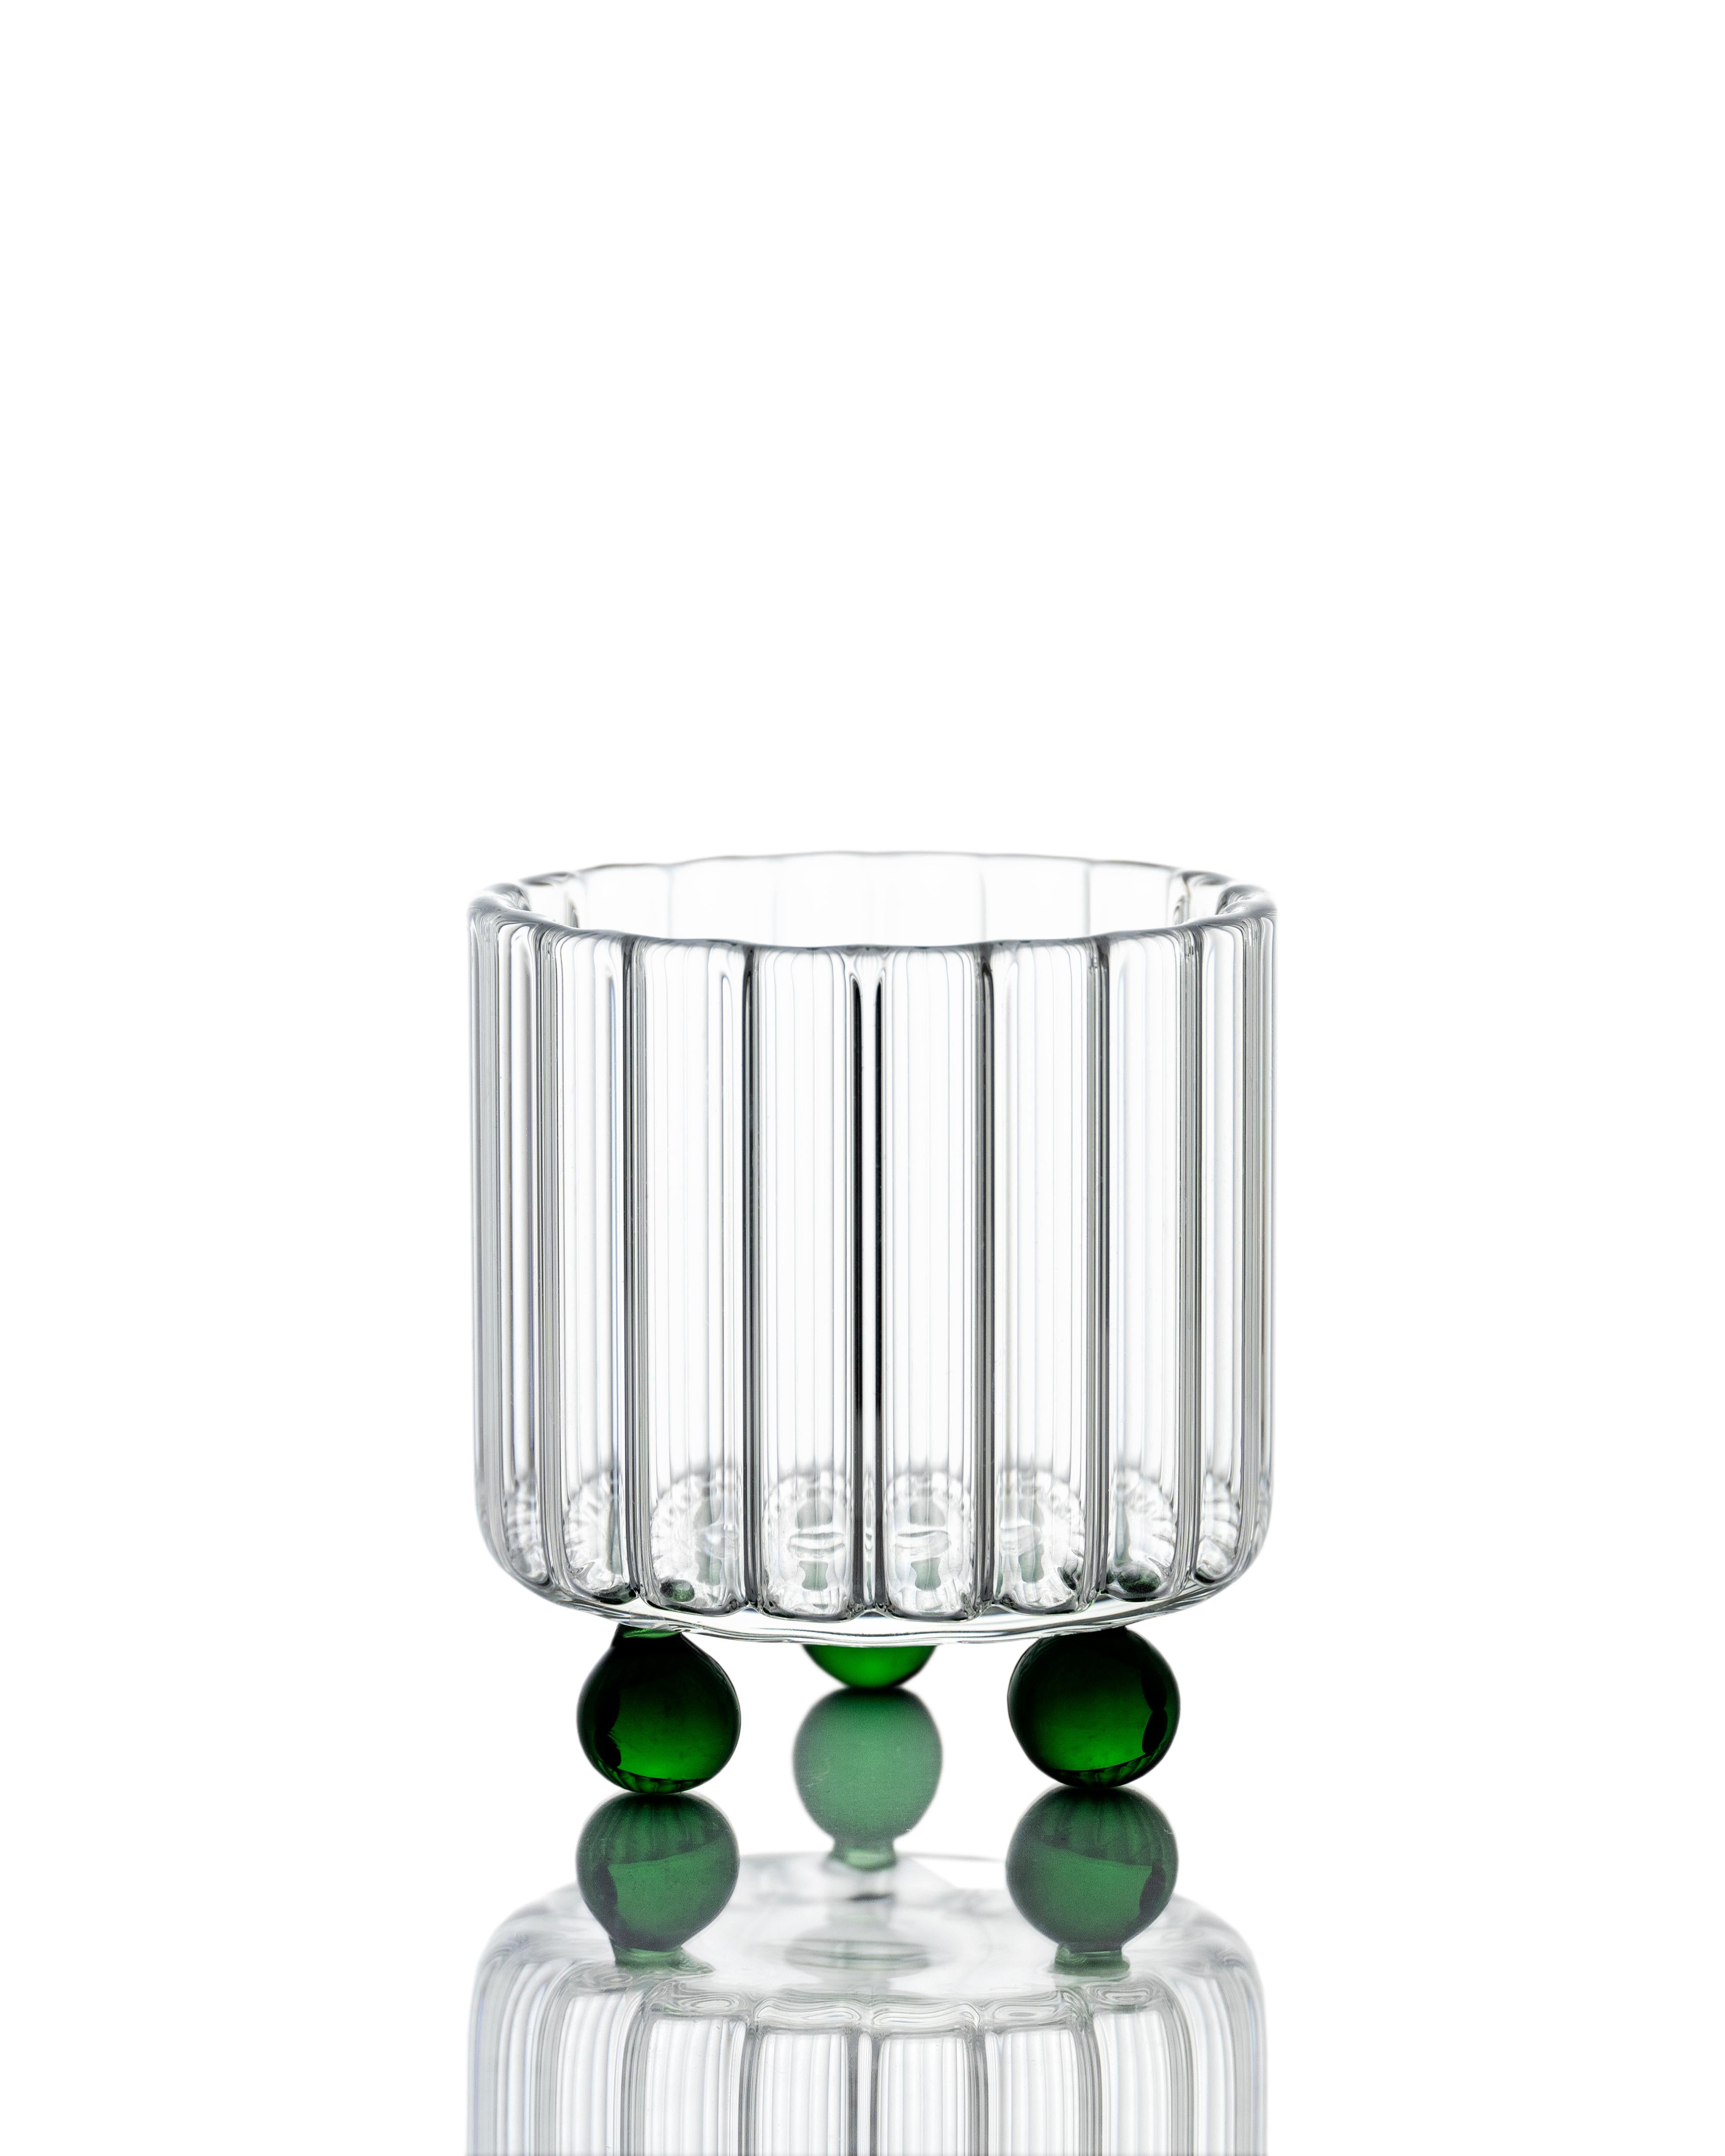 Italian Contemporary Green Lowball Glass by Agustina Bottoni — Handmade in Italy For Sale